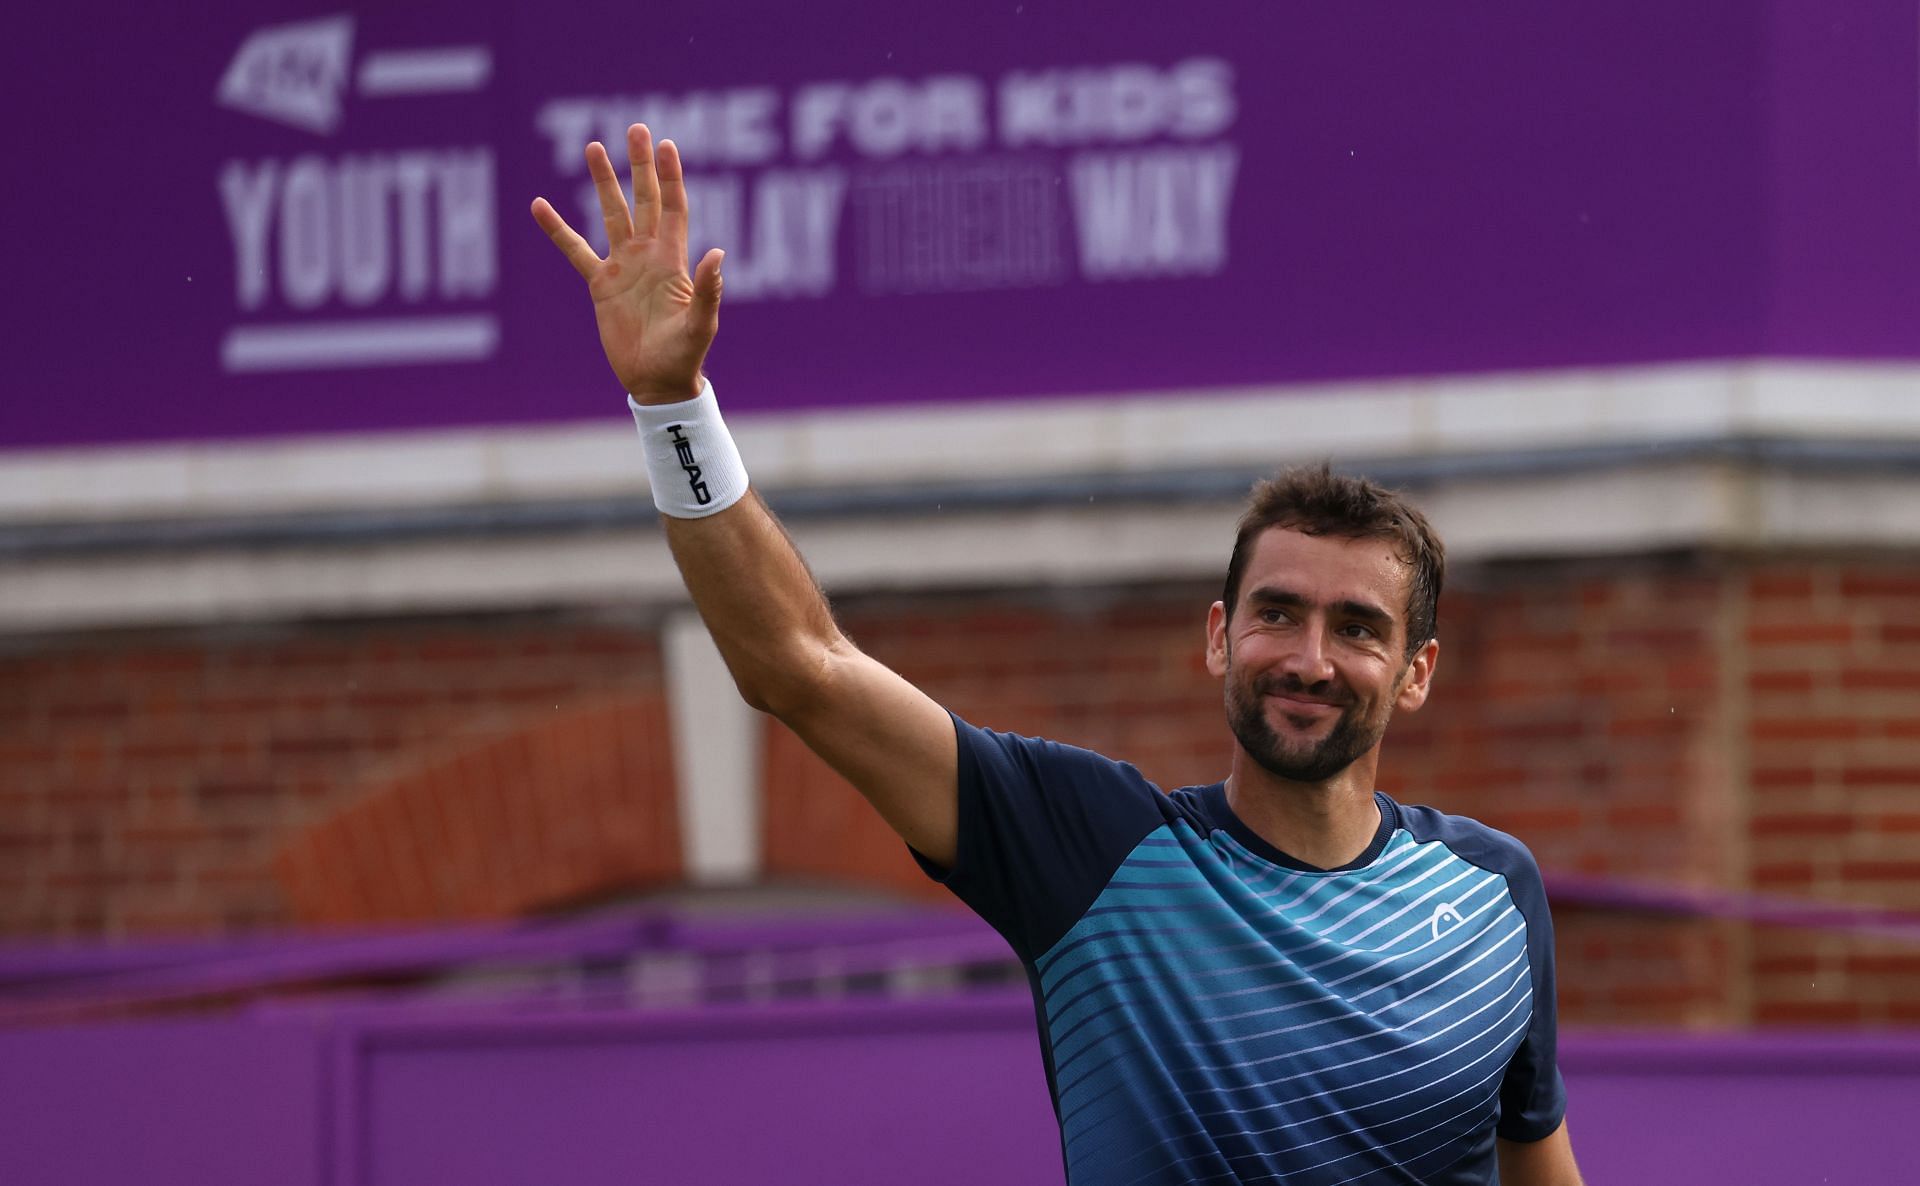 Marin Cilic at the 2021 Cinch Championships - Day 3